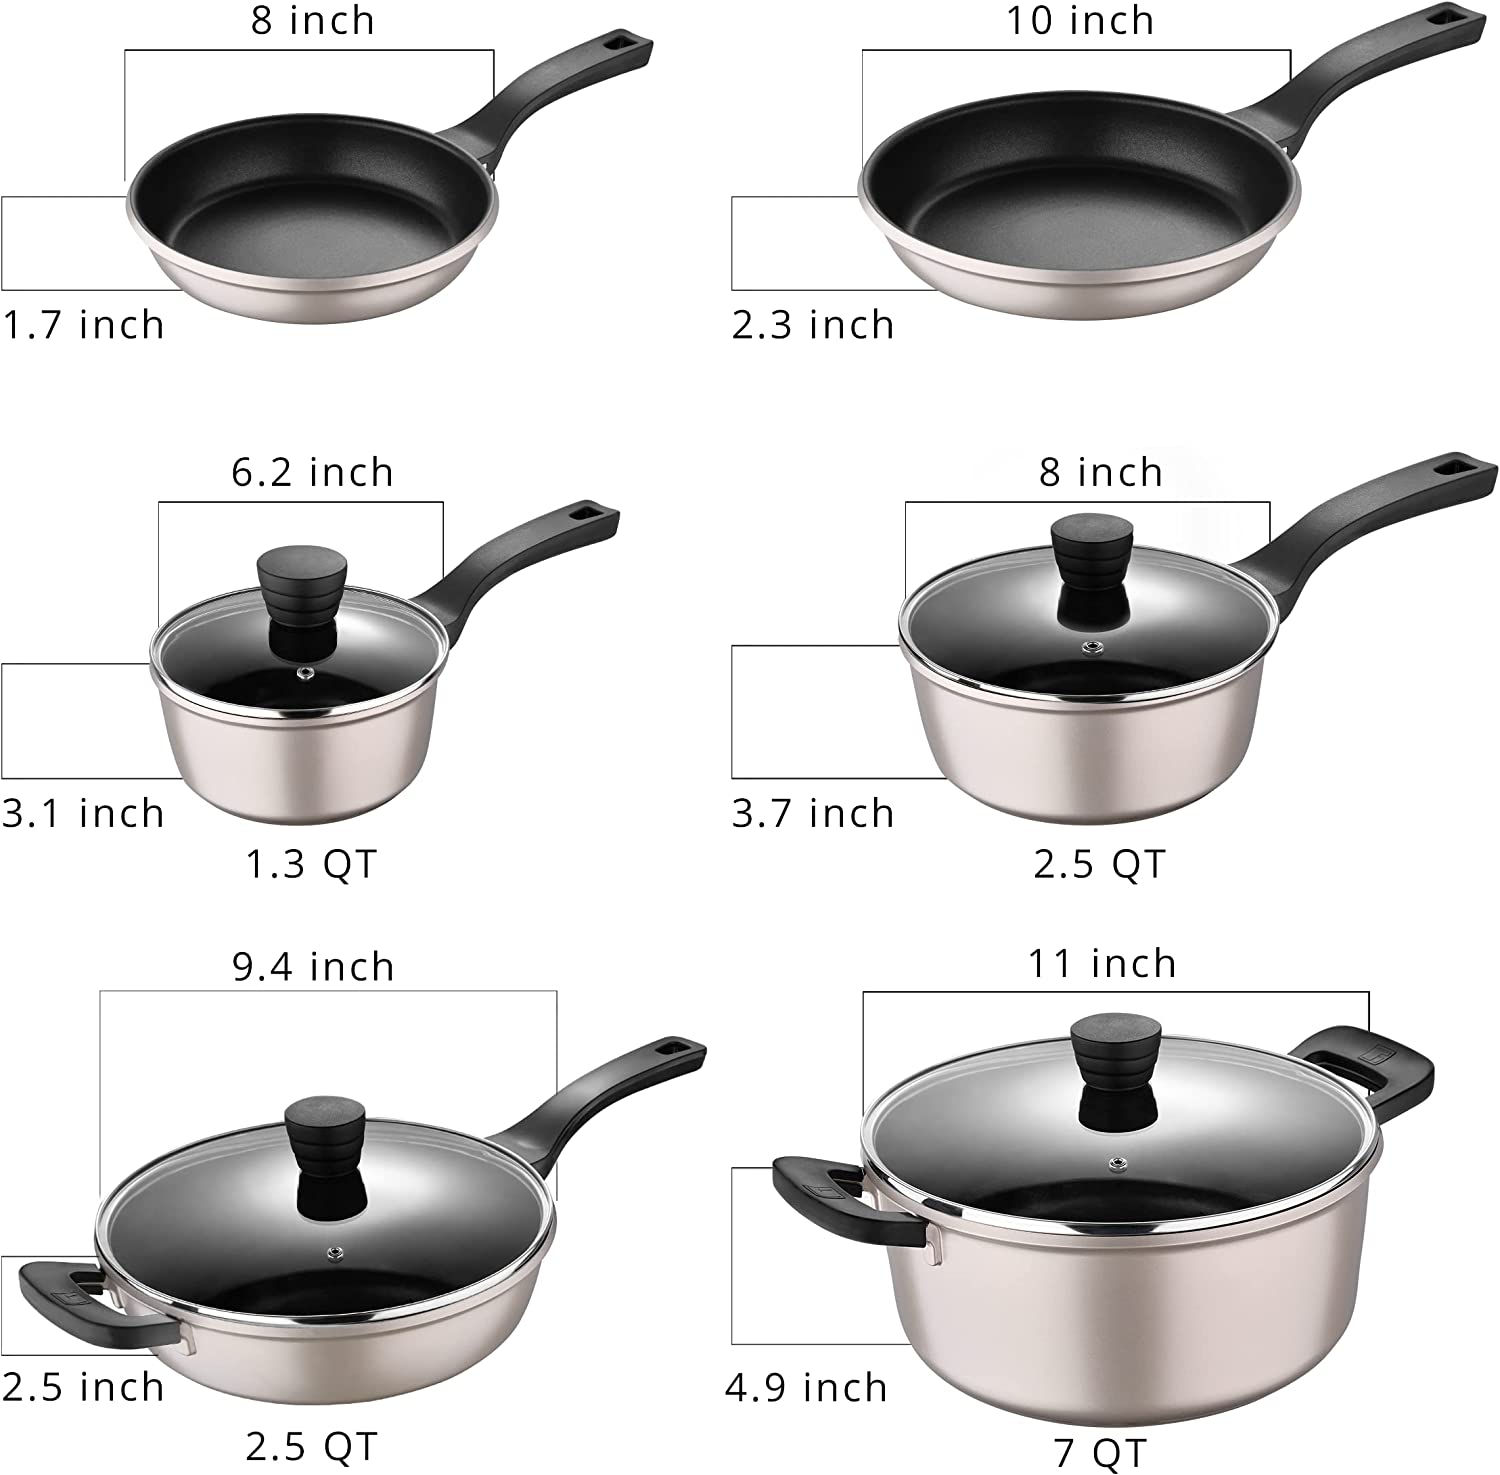 The Bergner Cookware Review - Bergner Pots And Pans - Full Guide